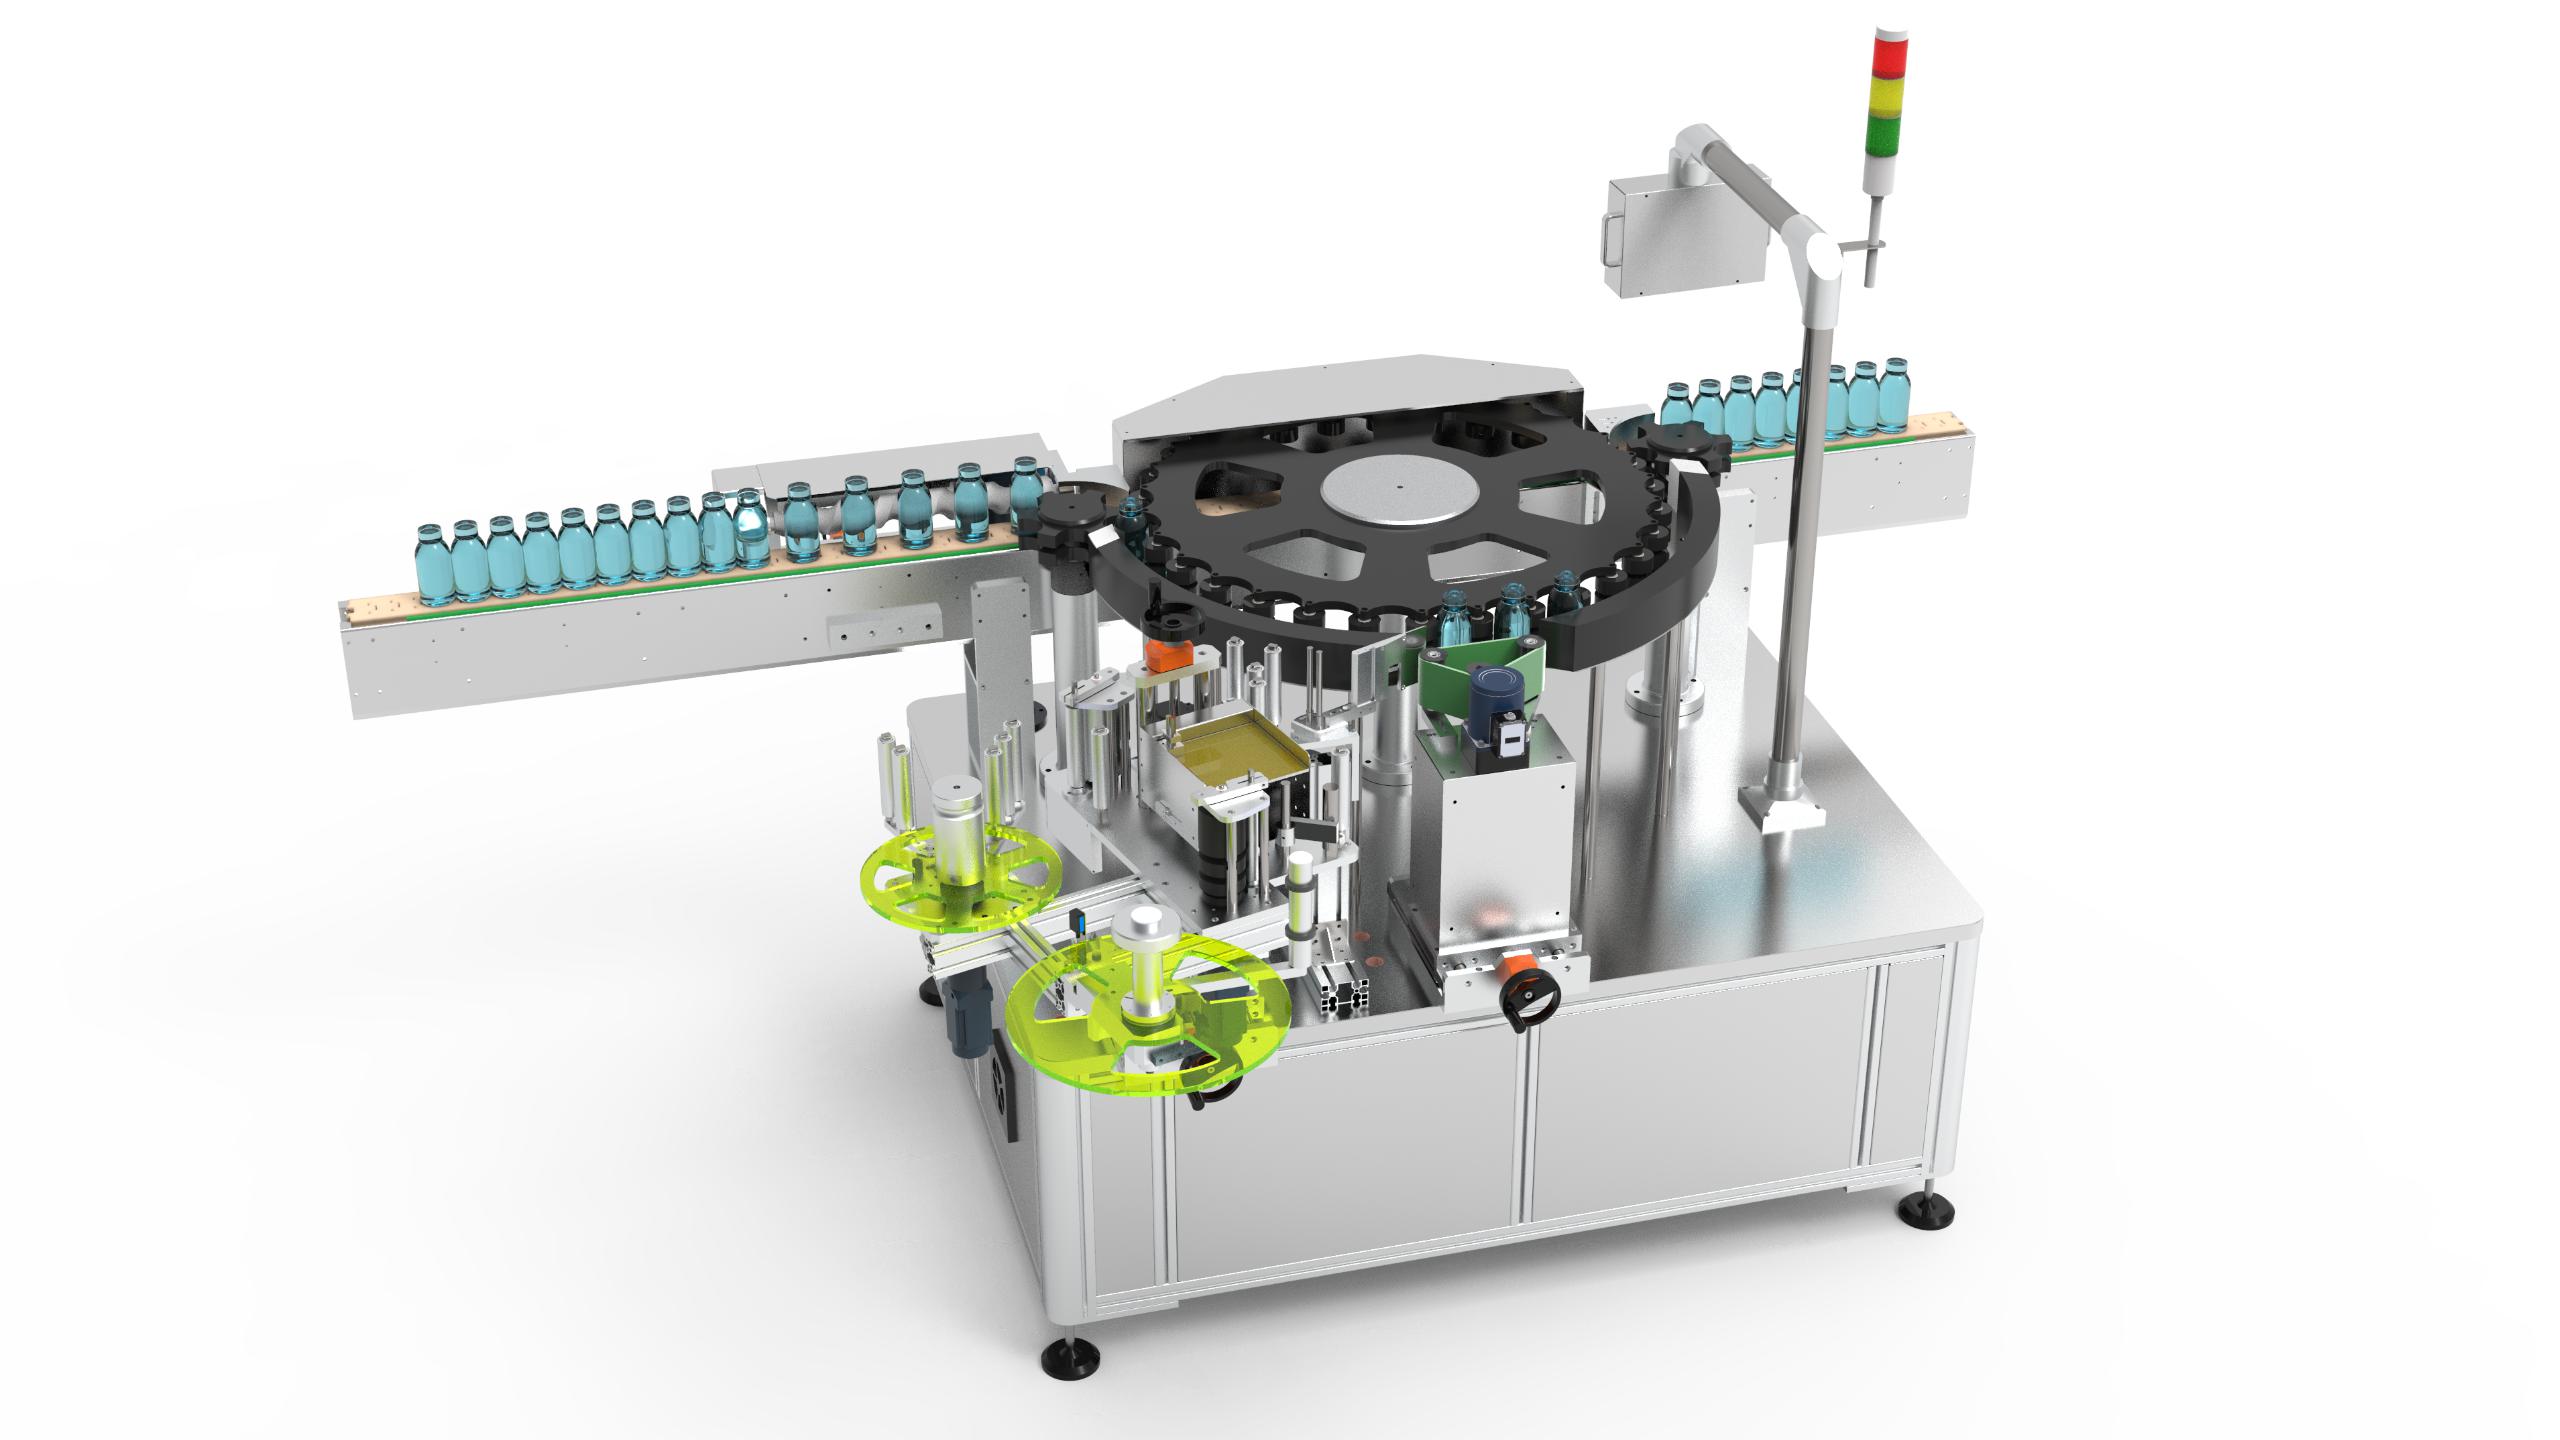 High Speed Rotary Labeler